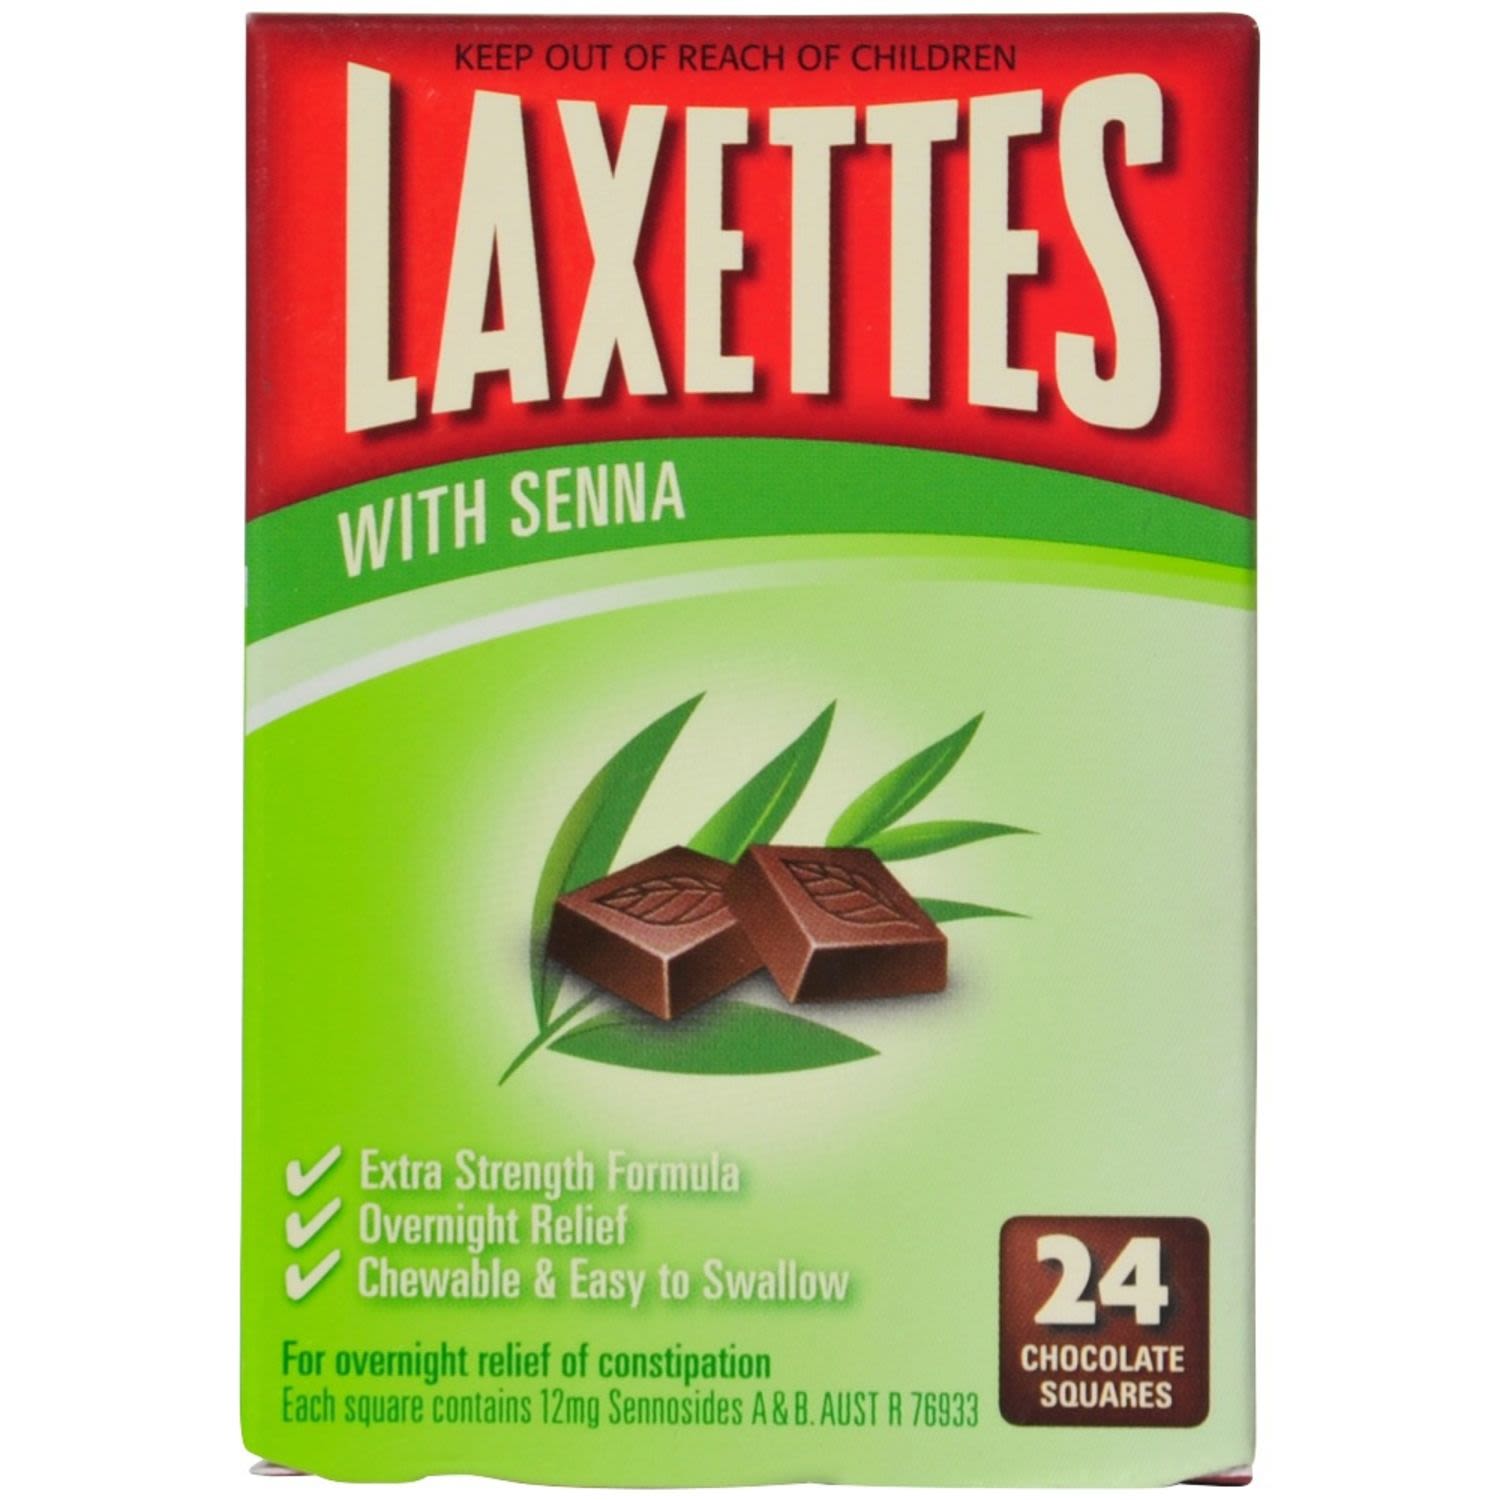 Laxettes Senna Chocolate Squares Laxatives, 24 Each